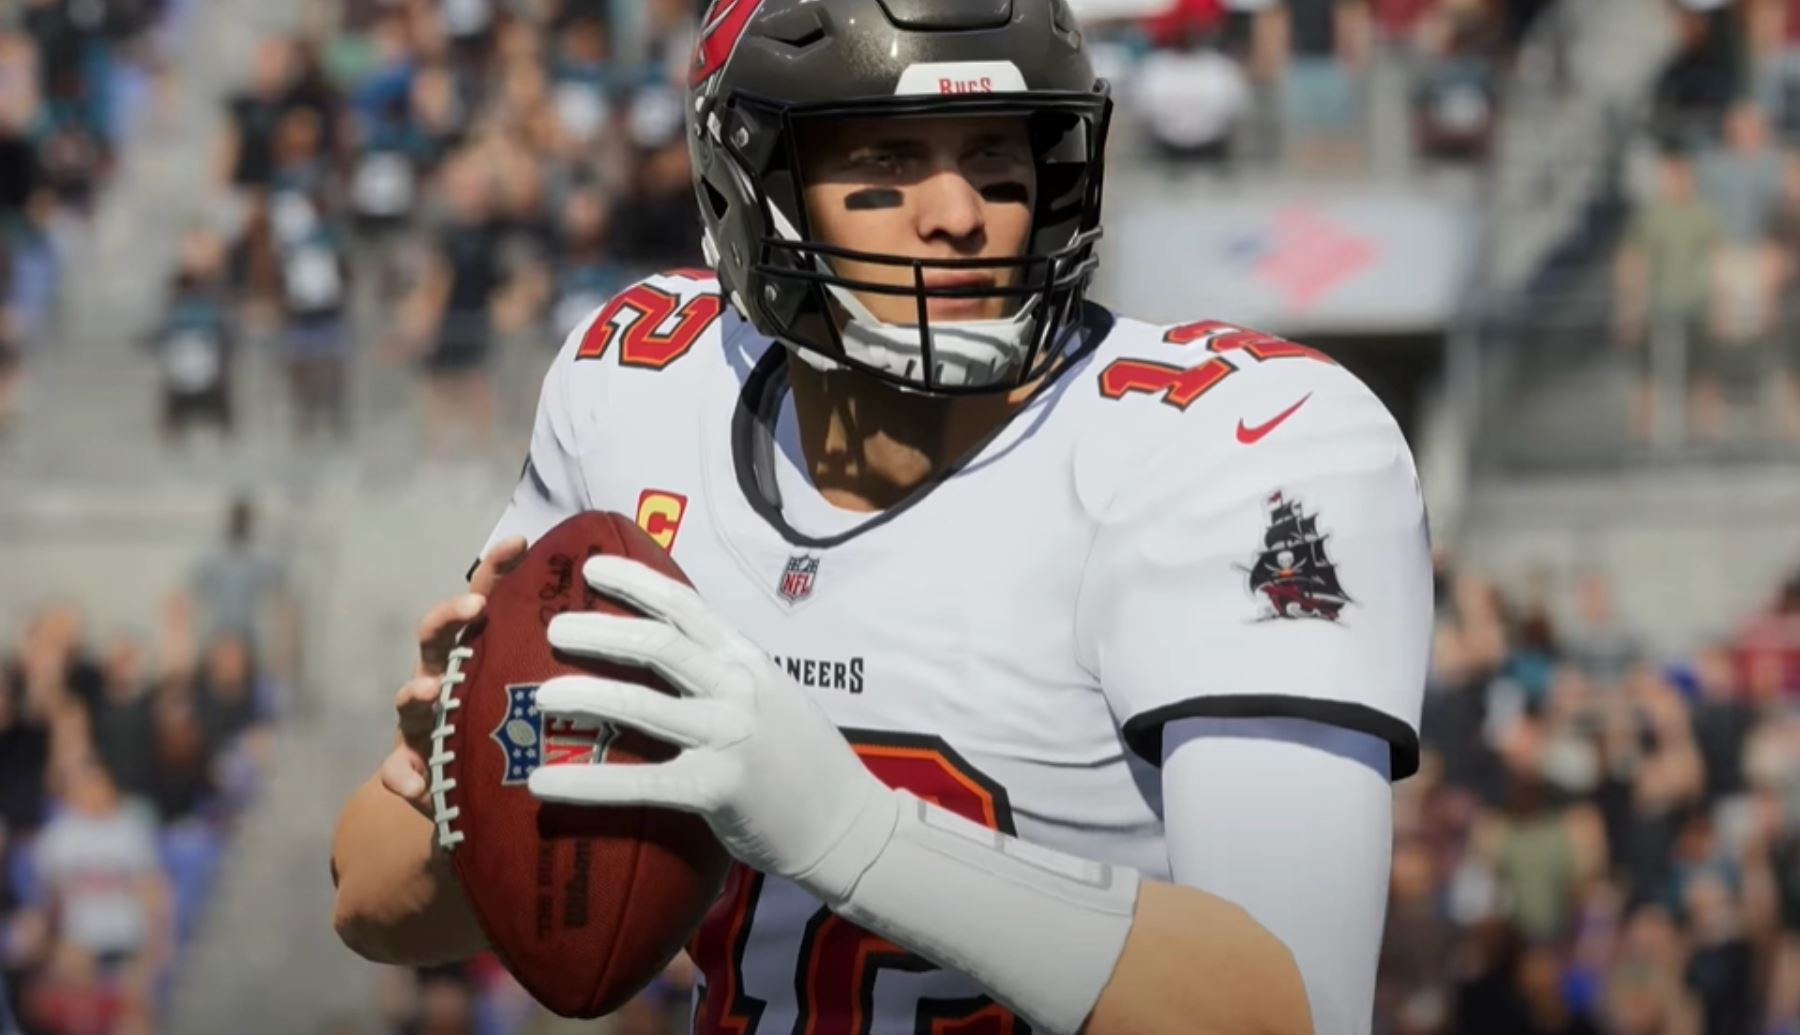 madden 22 ps4 download